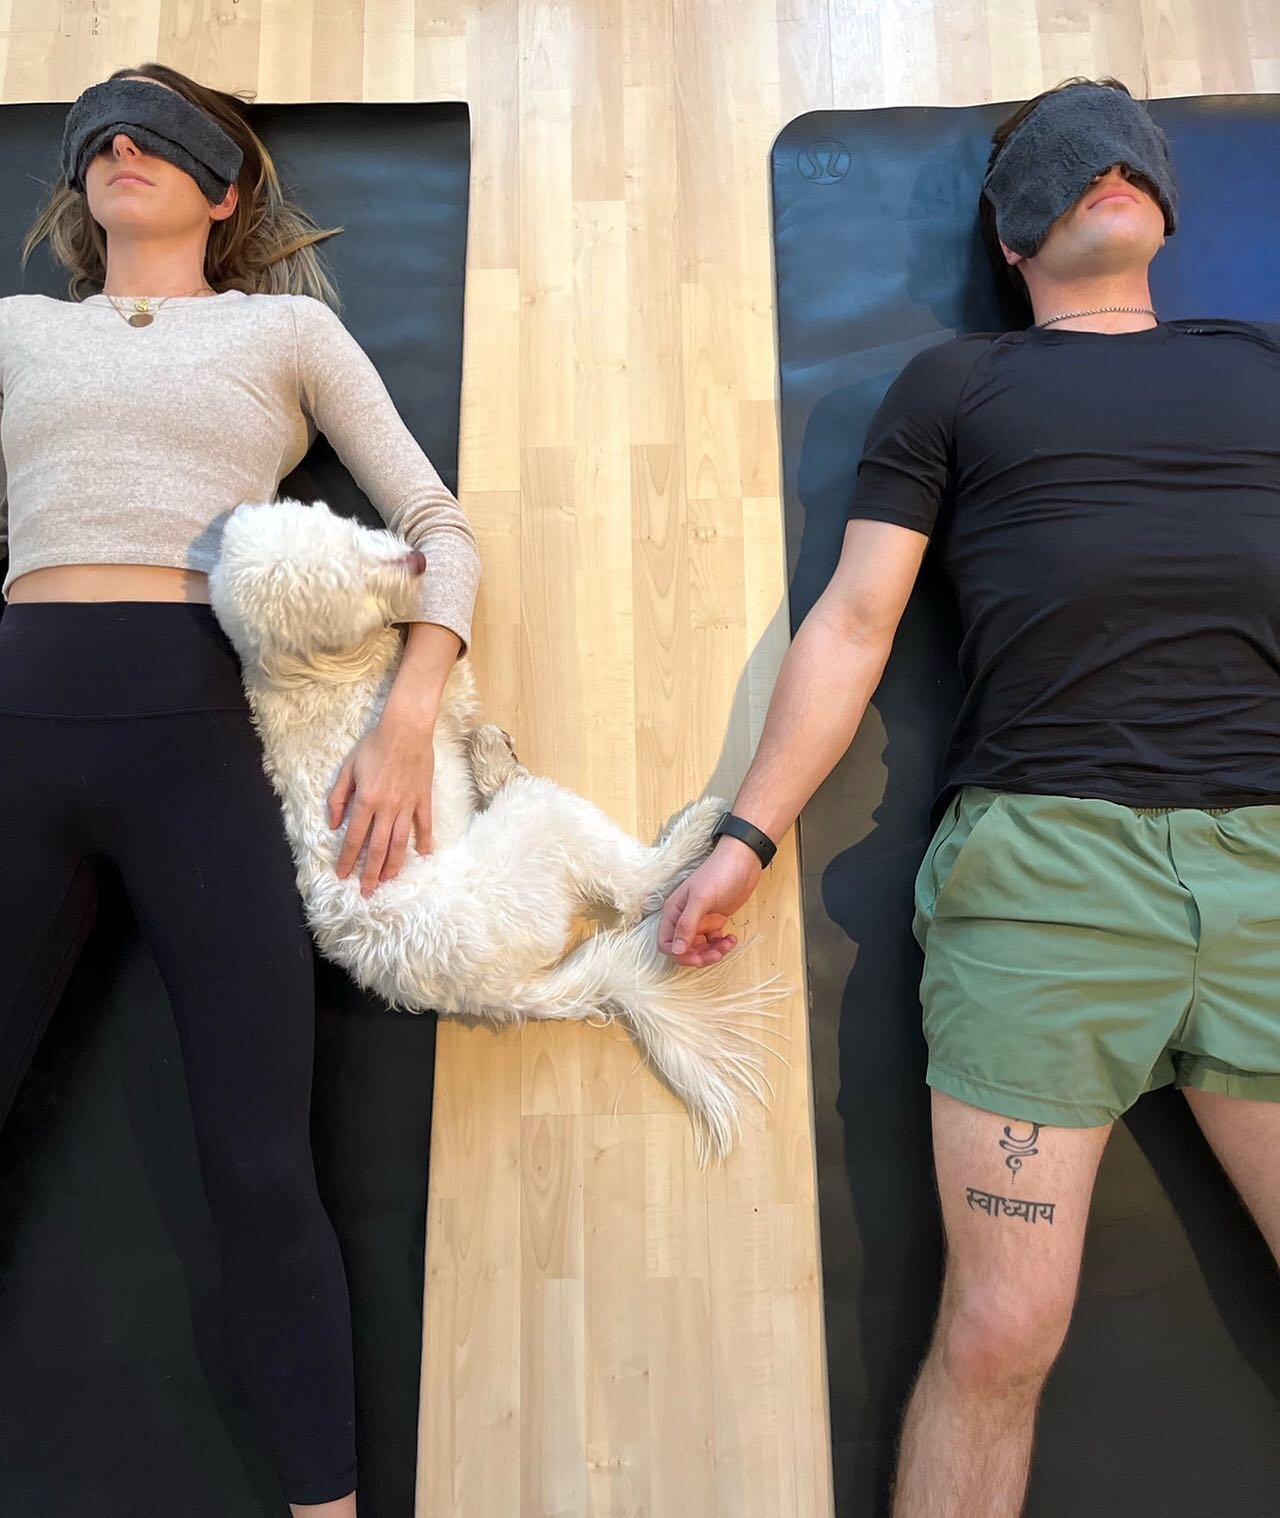 ~ Yoga Nidra ~
⠀⠀⠀⠀⠀⠀⠀⠀⠀
We've added some deep, intentional rest to the schedule.
⠀⠀⠀⠀⠀⠀⠀⠀⠀
Every Wednesay at 8pm, join Bailey for a beautiful restorative journey into the heart, connecting with your authentic desires through the powerful practice of